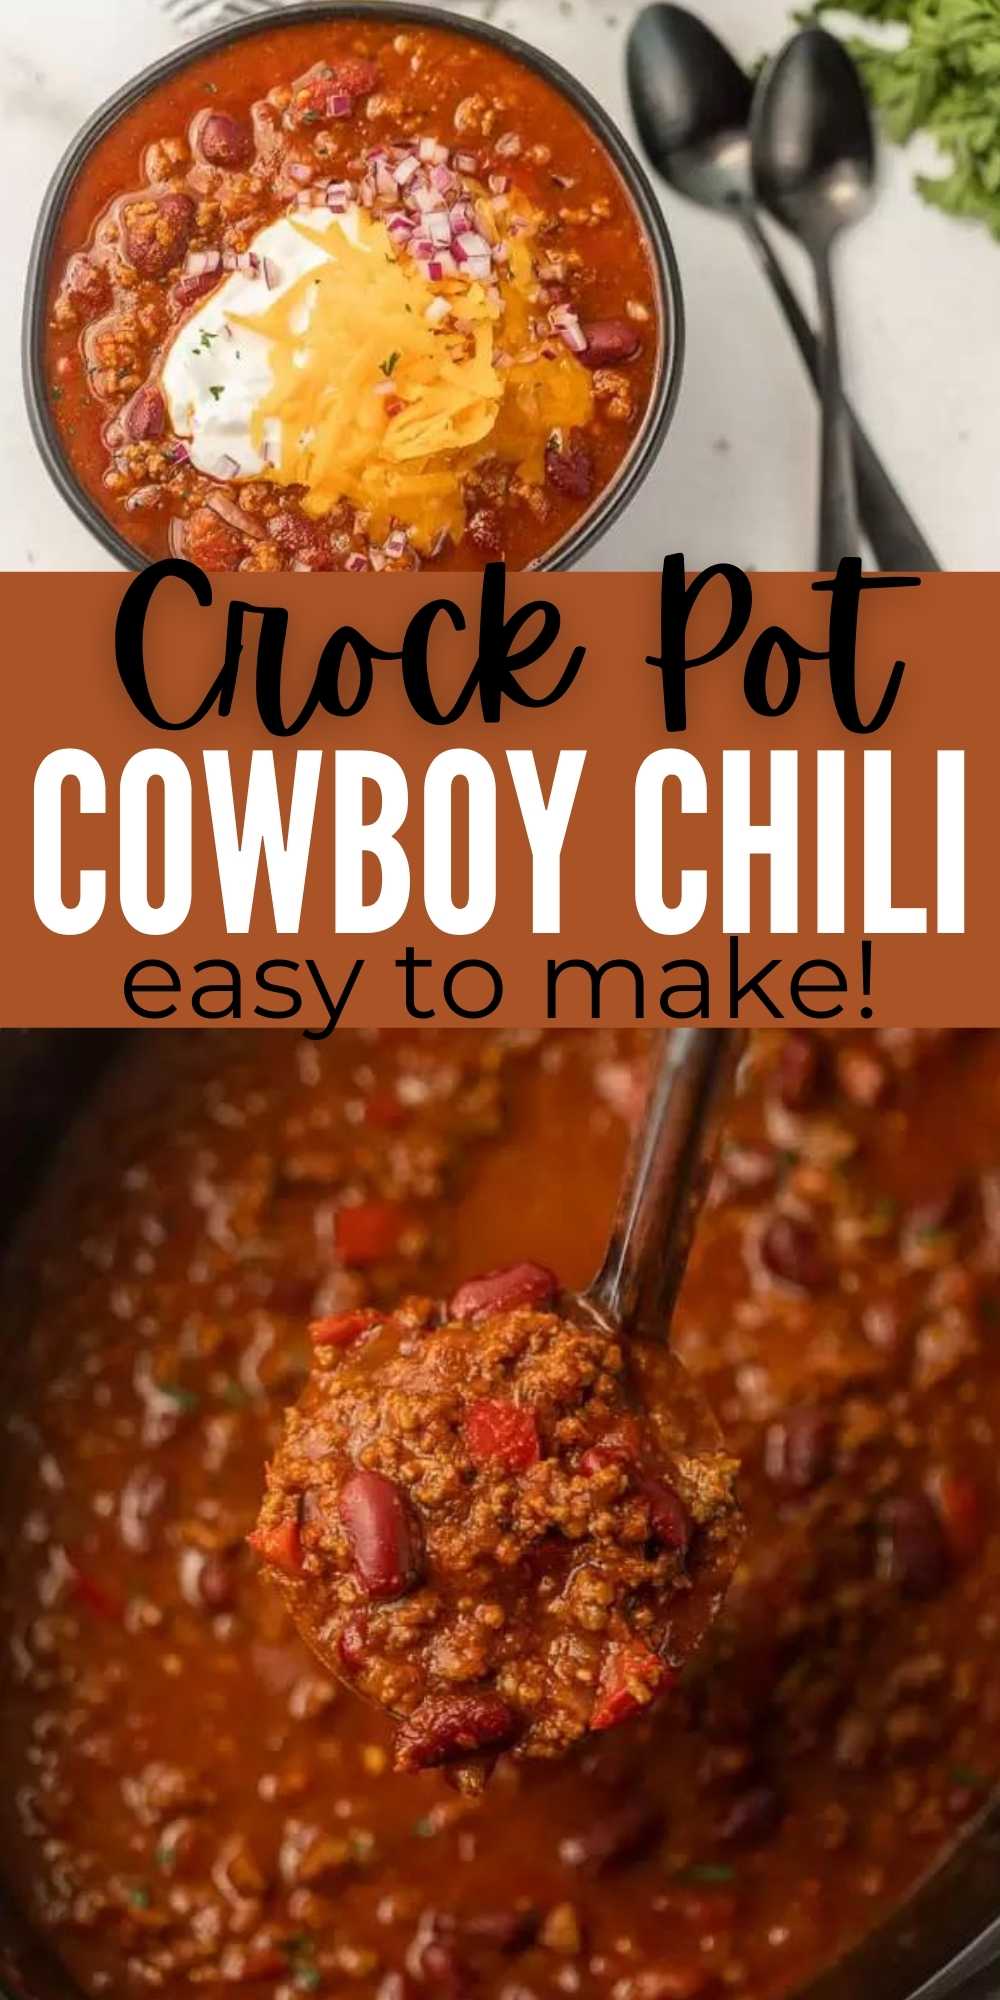 Crock Pot Cowboy Chili is loaded with hearty beef, beans, tomatoes and more. Each bite is flavorful in this family friendly meal. Everyone will love this easy to make Slow Cooker Cowboy Chili Recipe that is packed with flavor! #eatingonadime #chilirecipes #crockpotrecipes #slowcookerrecipes 
